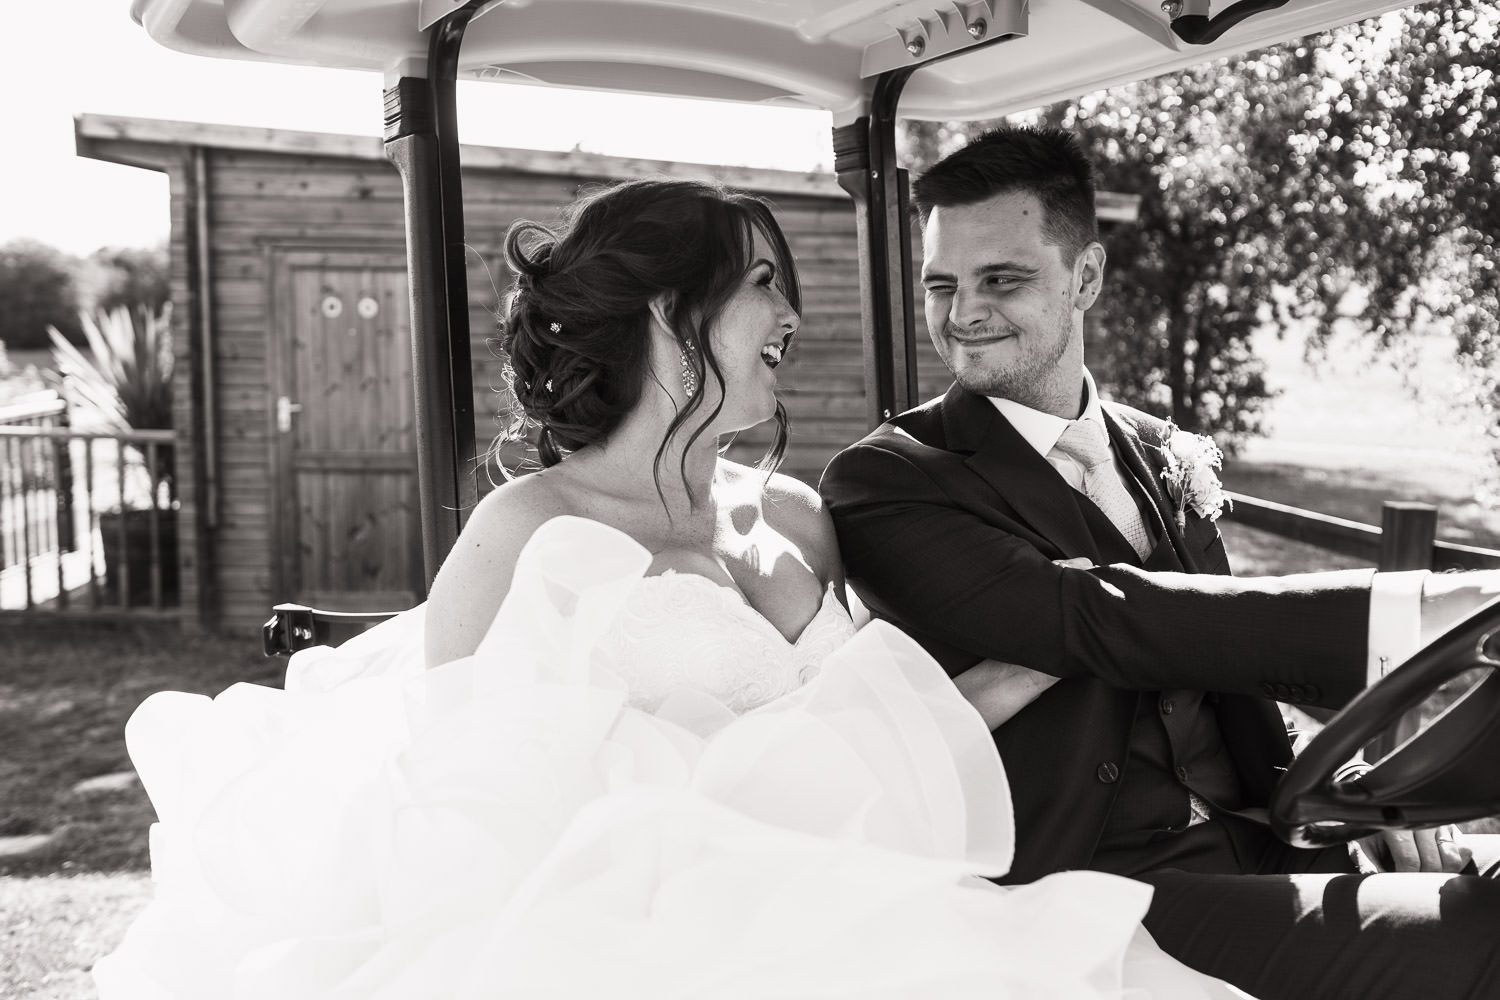 A bride and groom in a golf cart at a wedding in Essex. The bride is laughing and groom is winking.